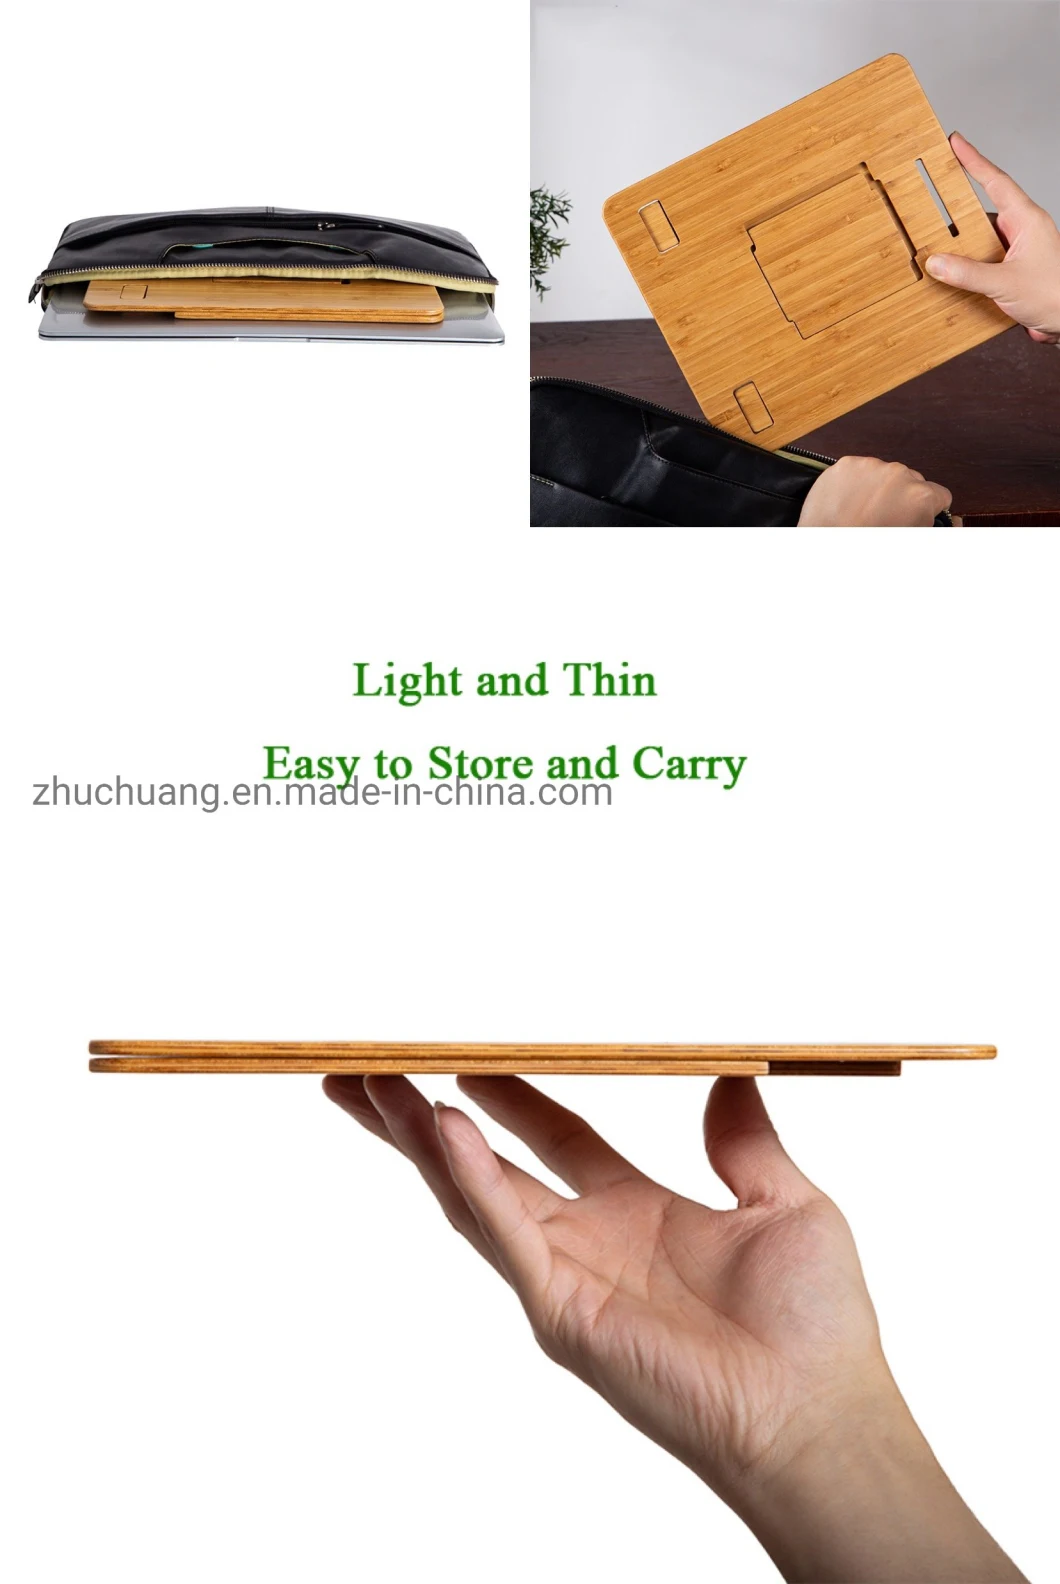 Table Holder Tray Bamboo Material Home Office iPad Reading Stand